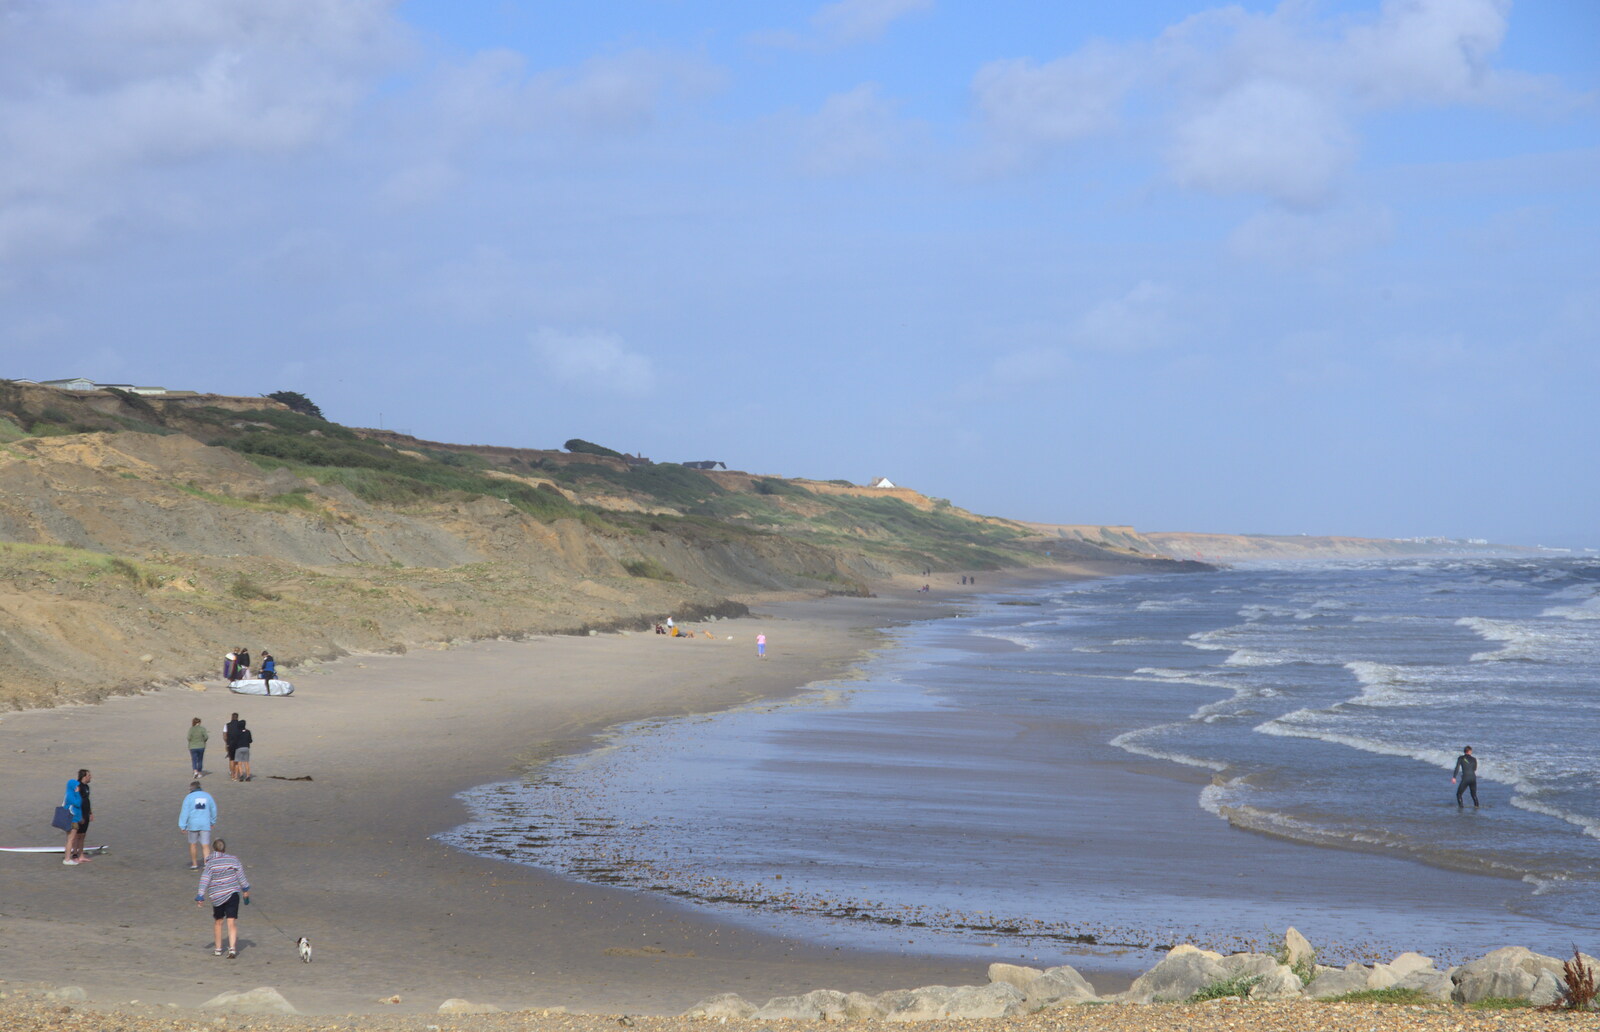 The beach at Chewton Bunny from Blustery Beach Trips, Walkford and Highcliffe, Dorset - 29th July 2018